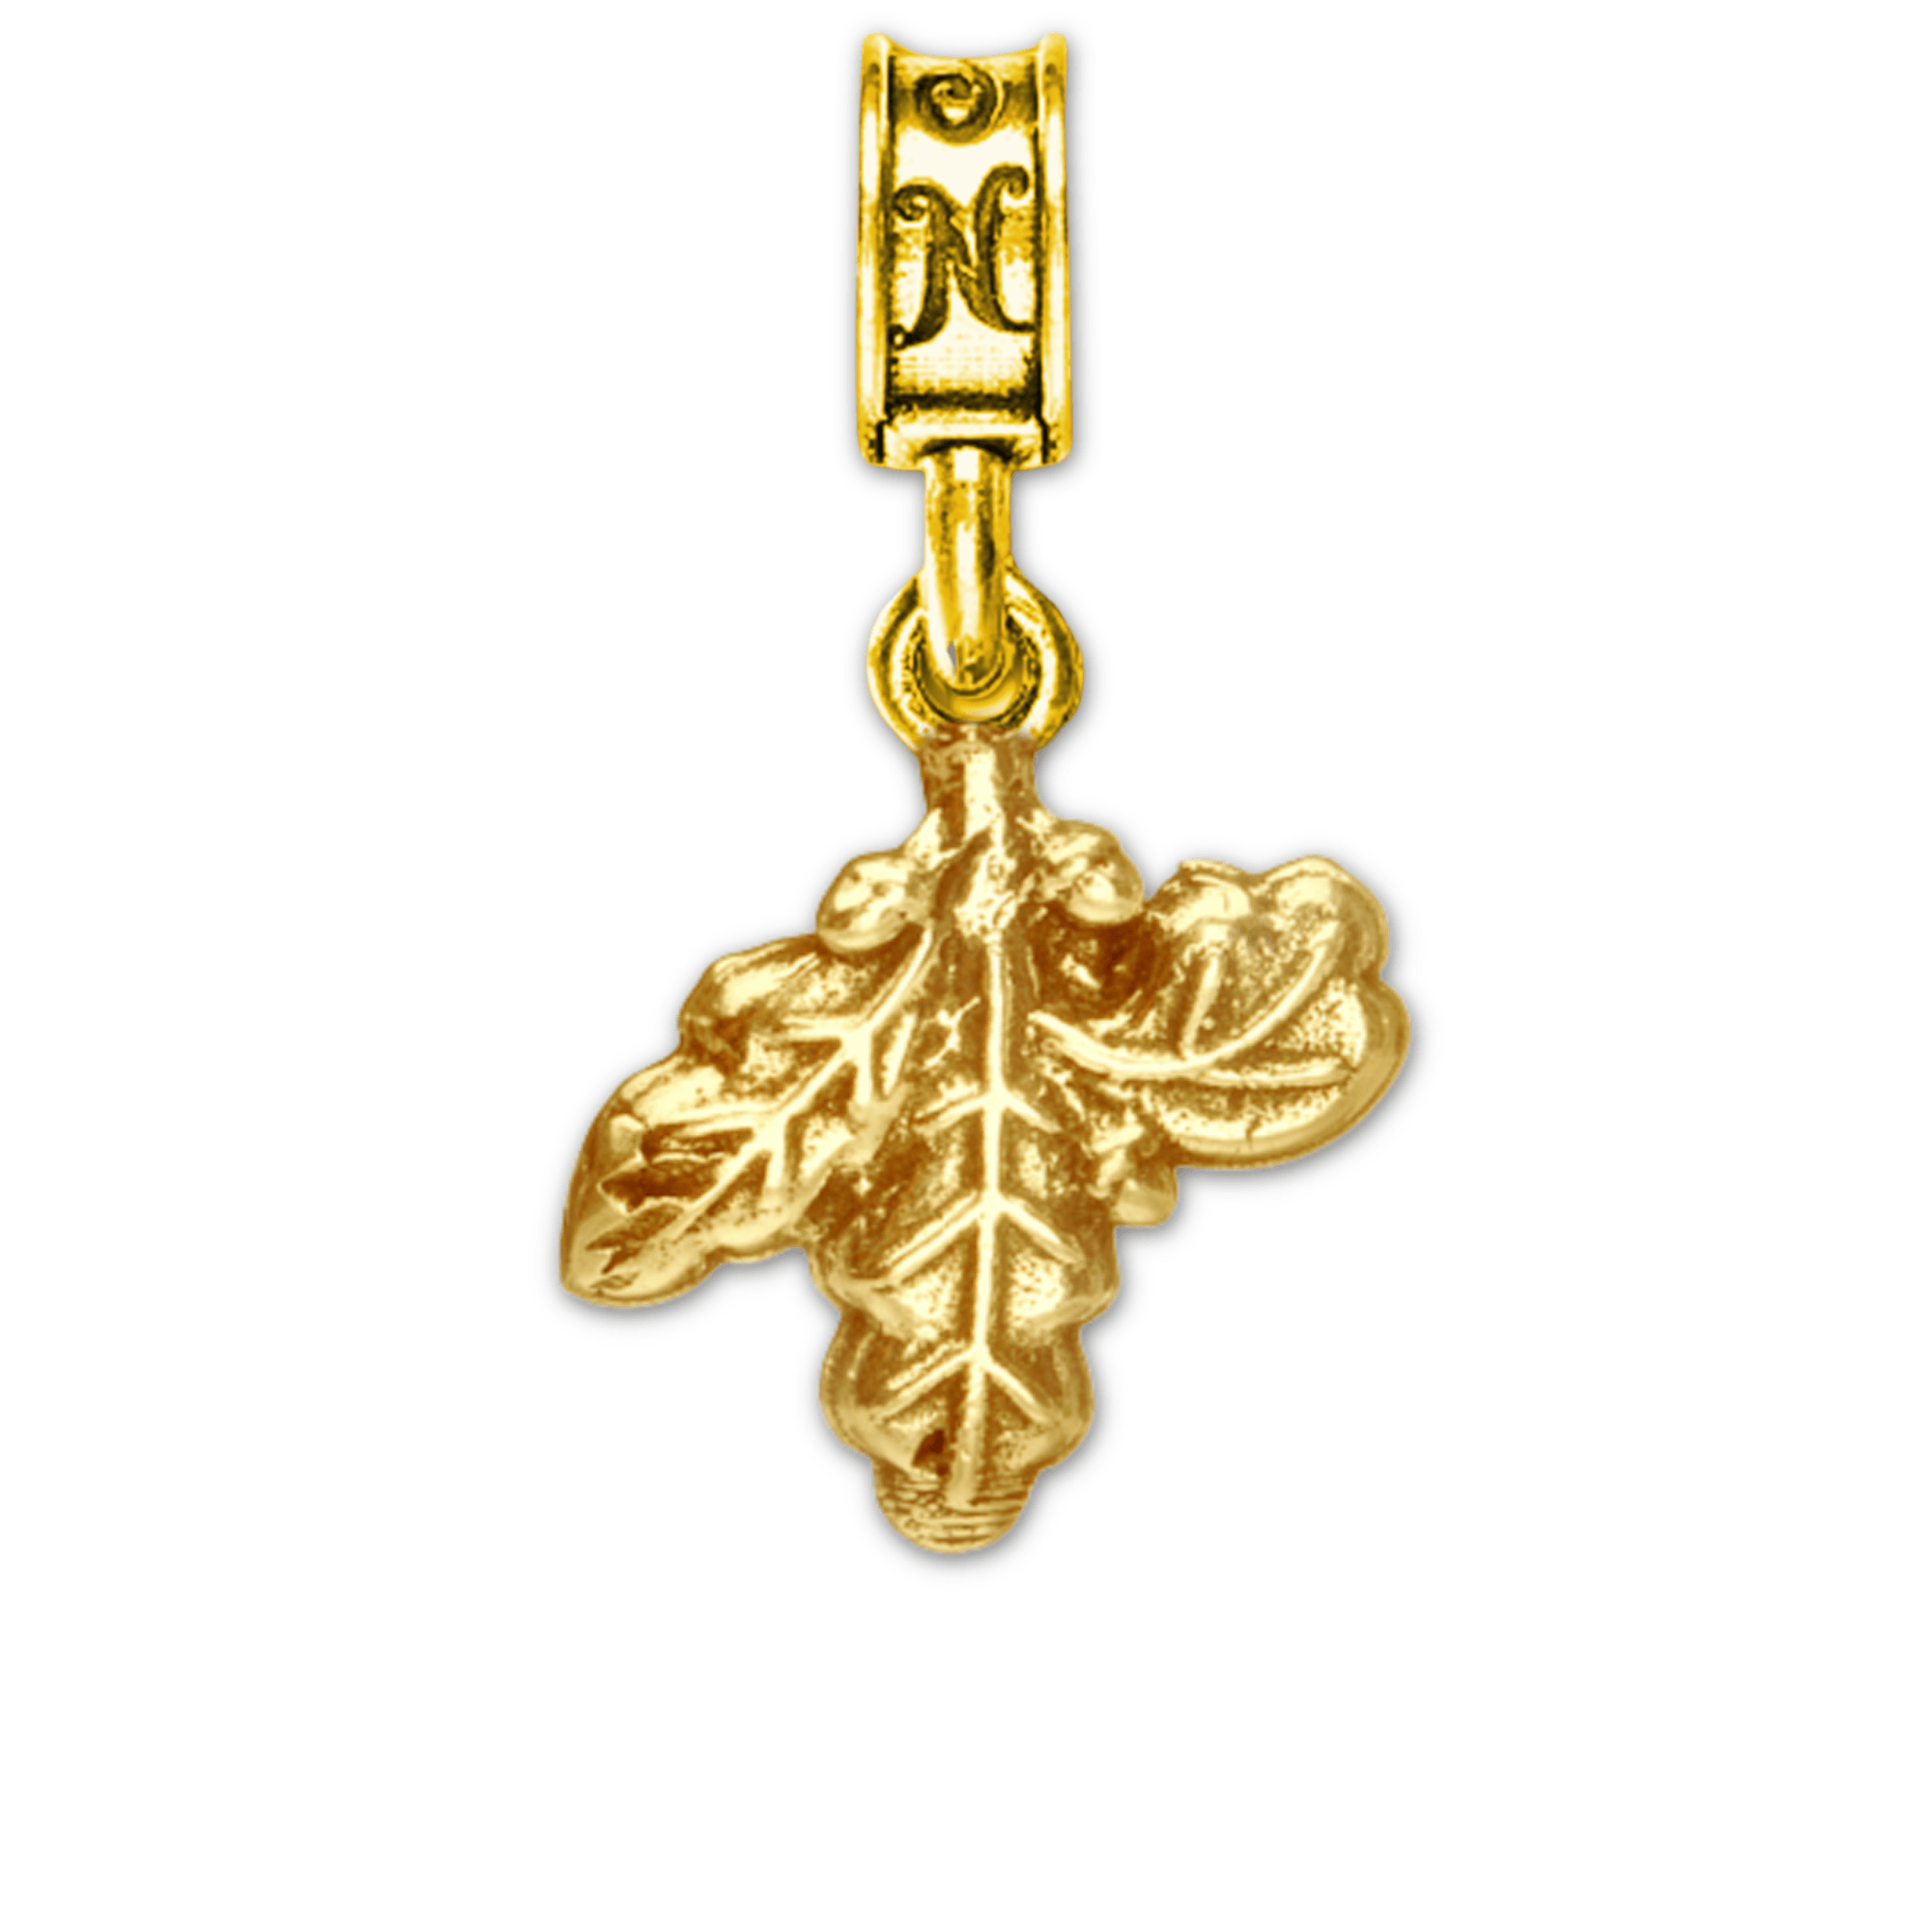 Military Jewelry, Military Charms, Navy, USN, Military Gifts, Navy Supply Corps Charm, Gold